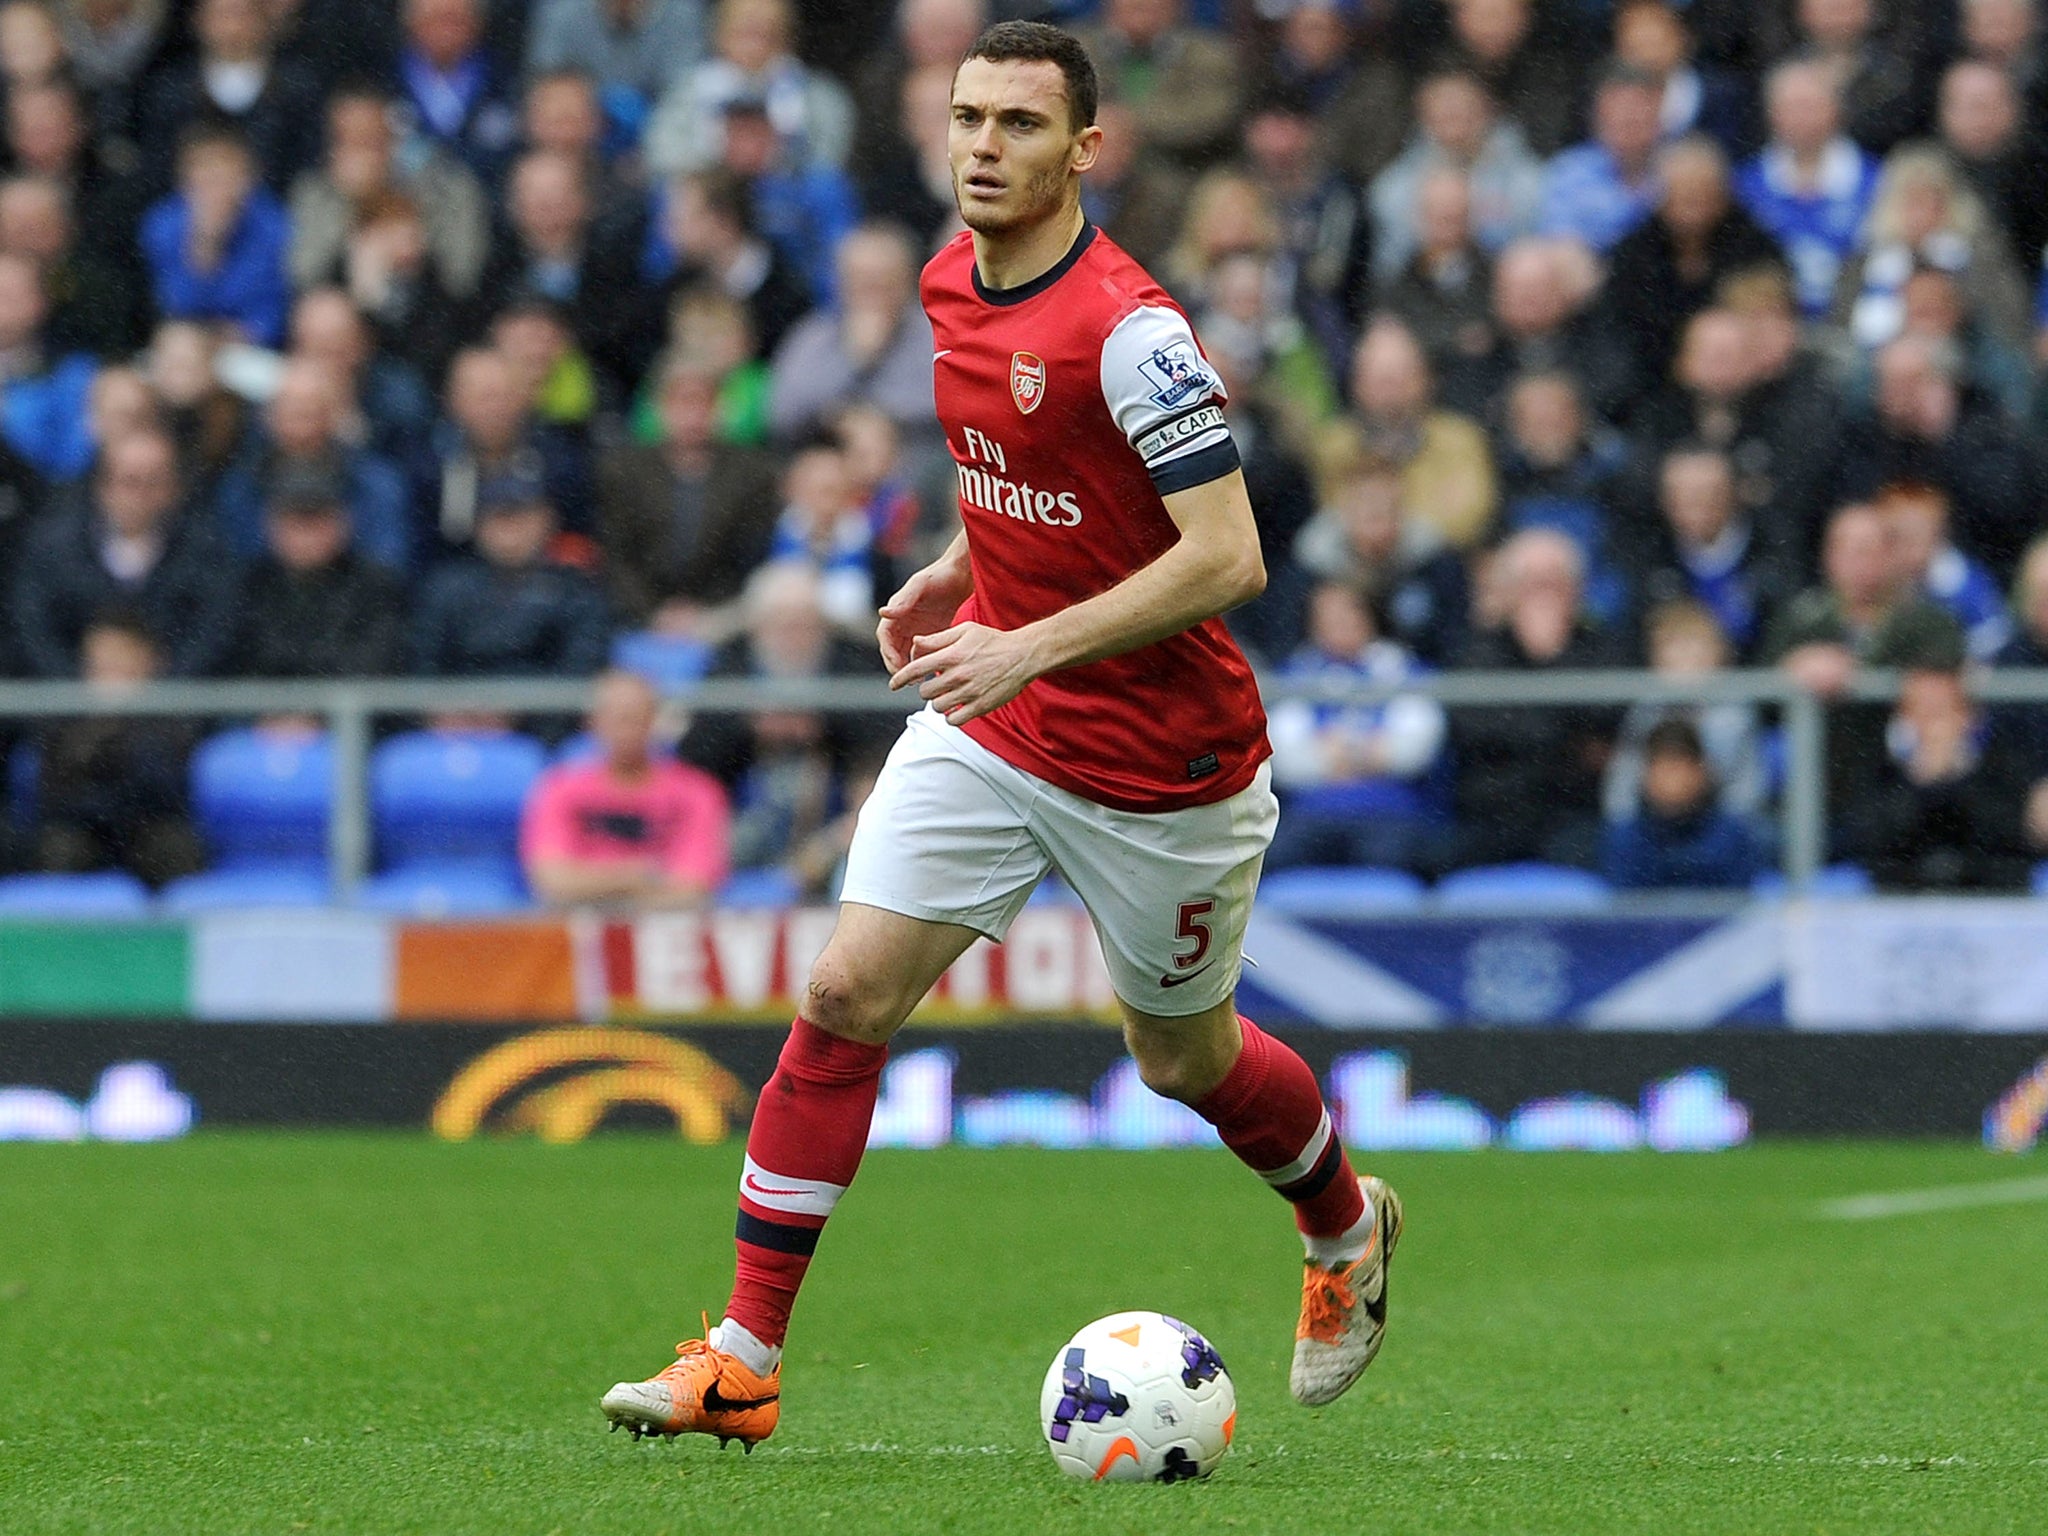 Thomas Vermaelen believes Arsenal need to focus on their Premier Leagu campaign despite the FA Cup final distraction